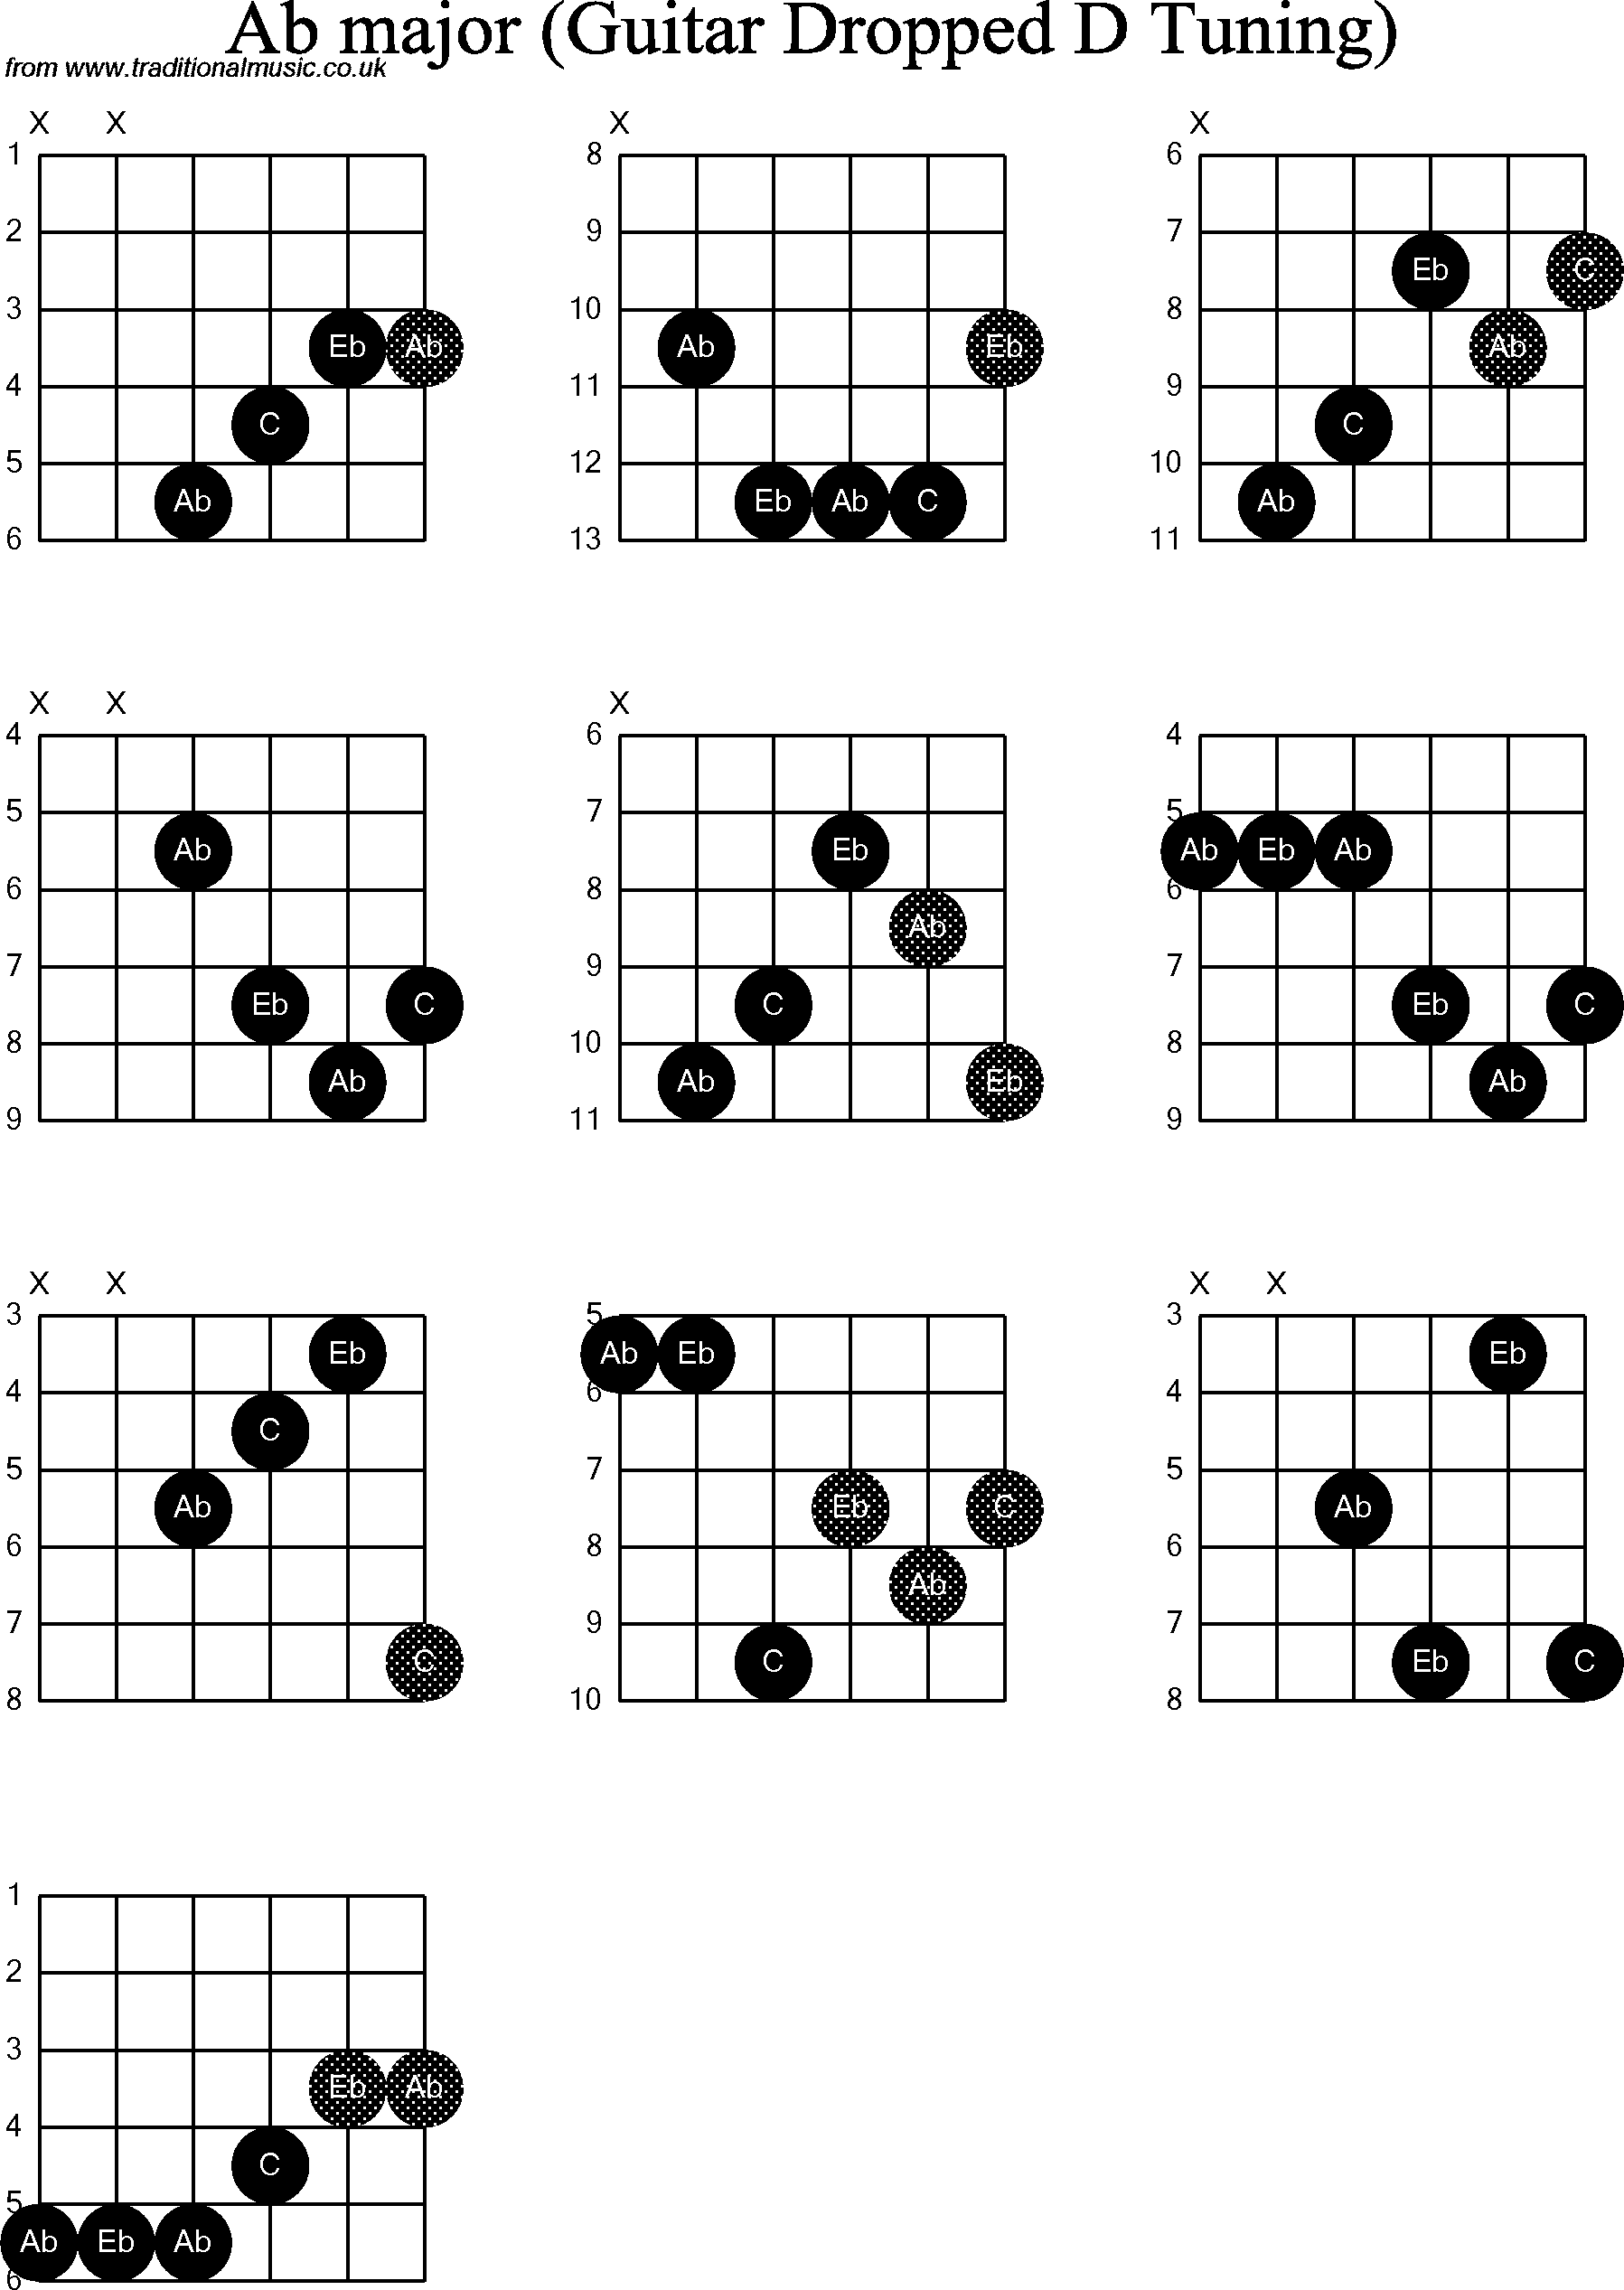 Chord diagrams for dropped D Guitar(DADGBE), Ab